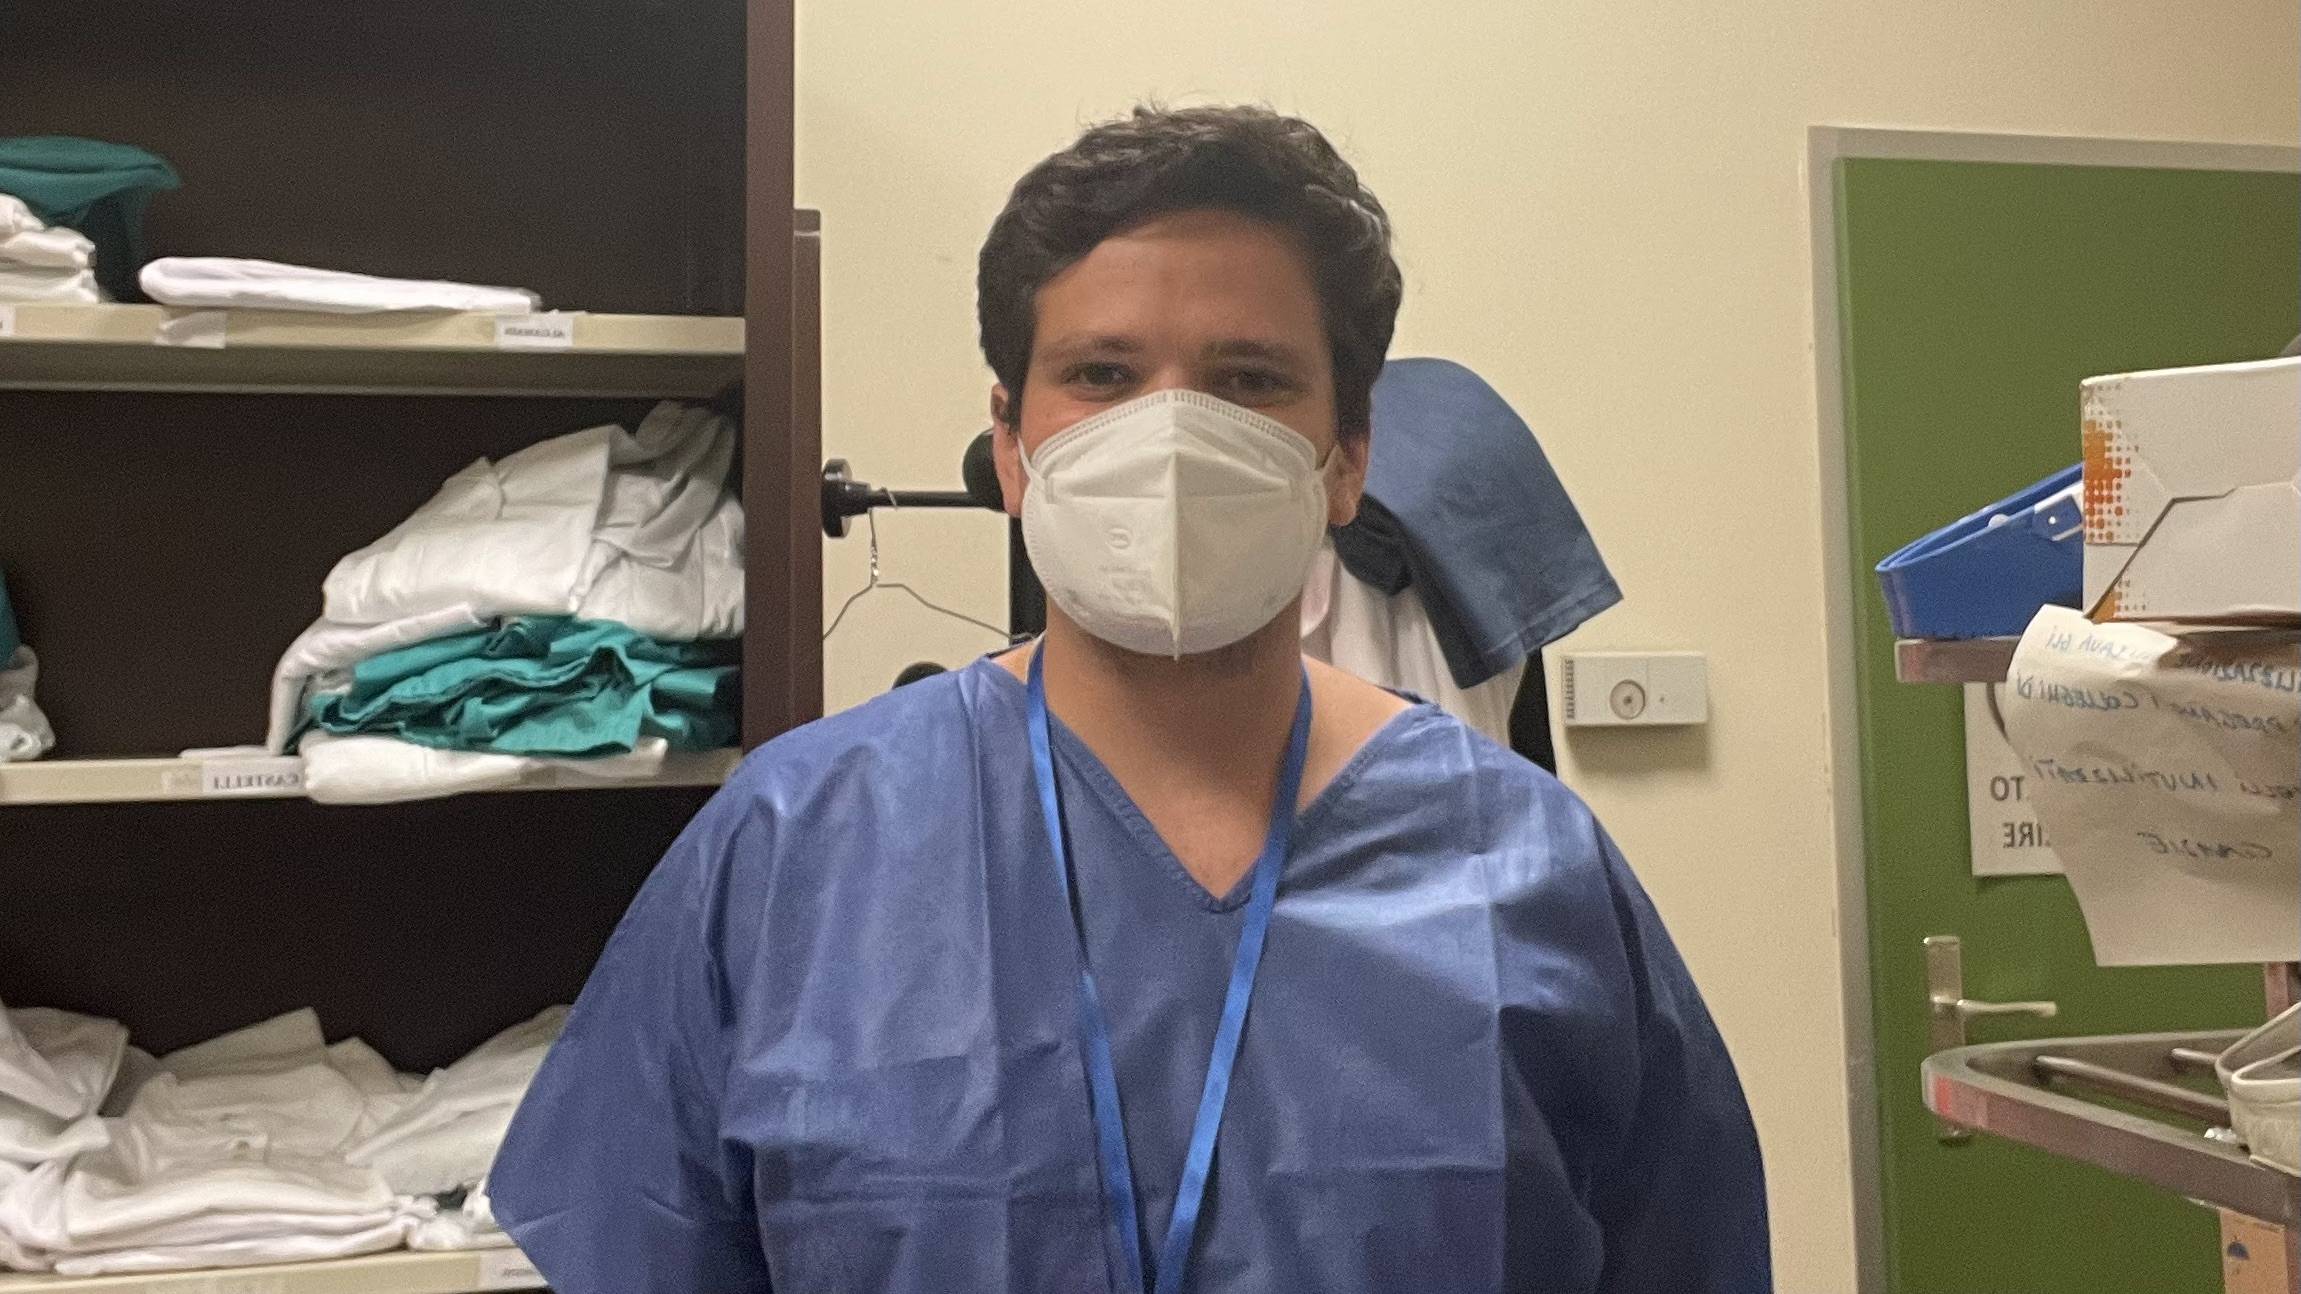 Clay dressed in scrubs, prepared to observe a surgery